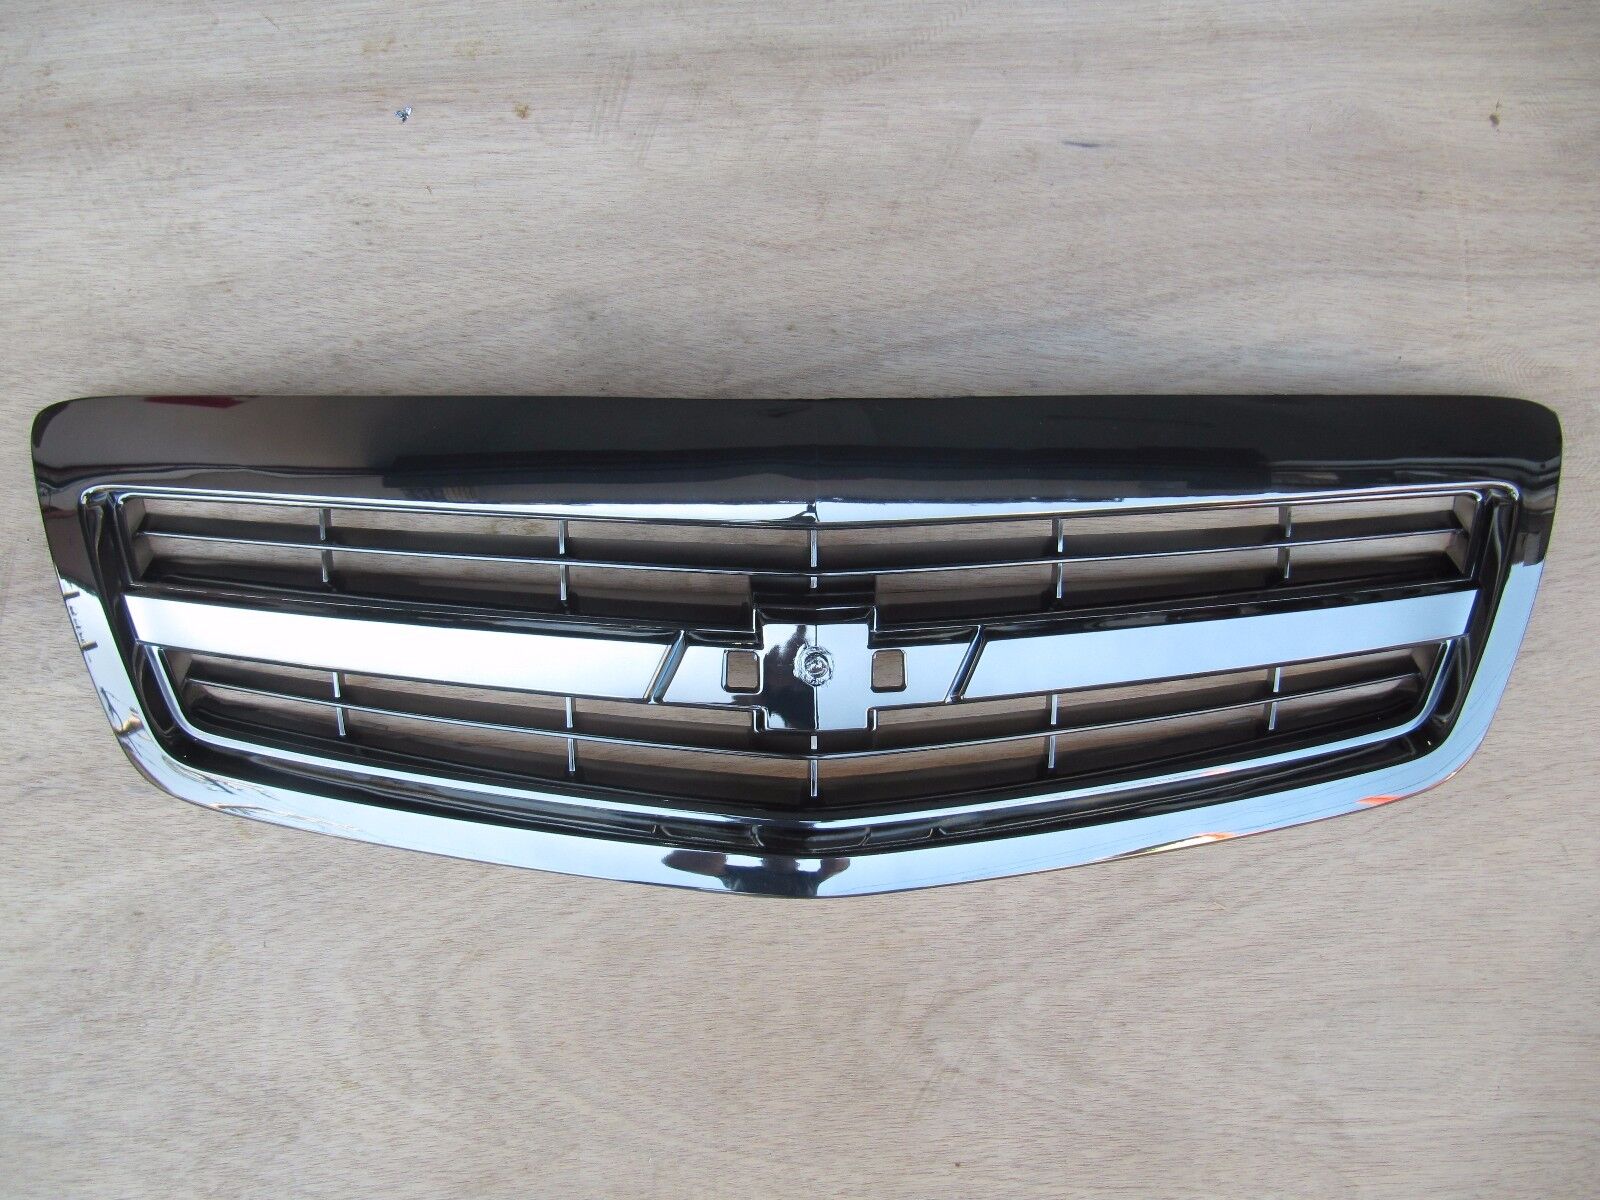 BLACK CHROME style 2011-14 GRILLE fits for CHEVY CAPRICE PPV Holden WM Statesman